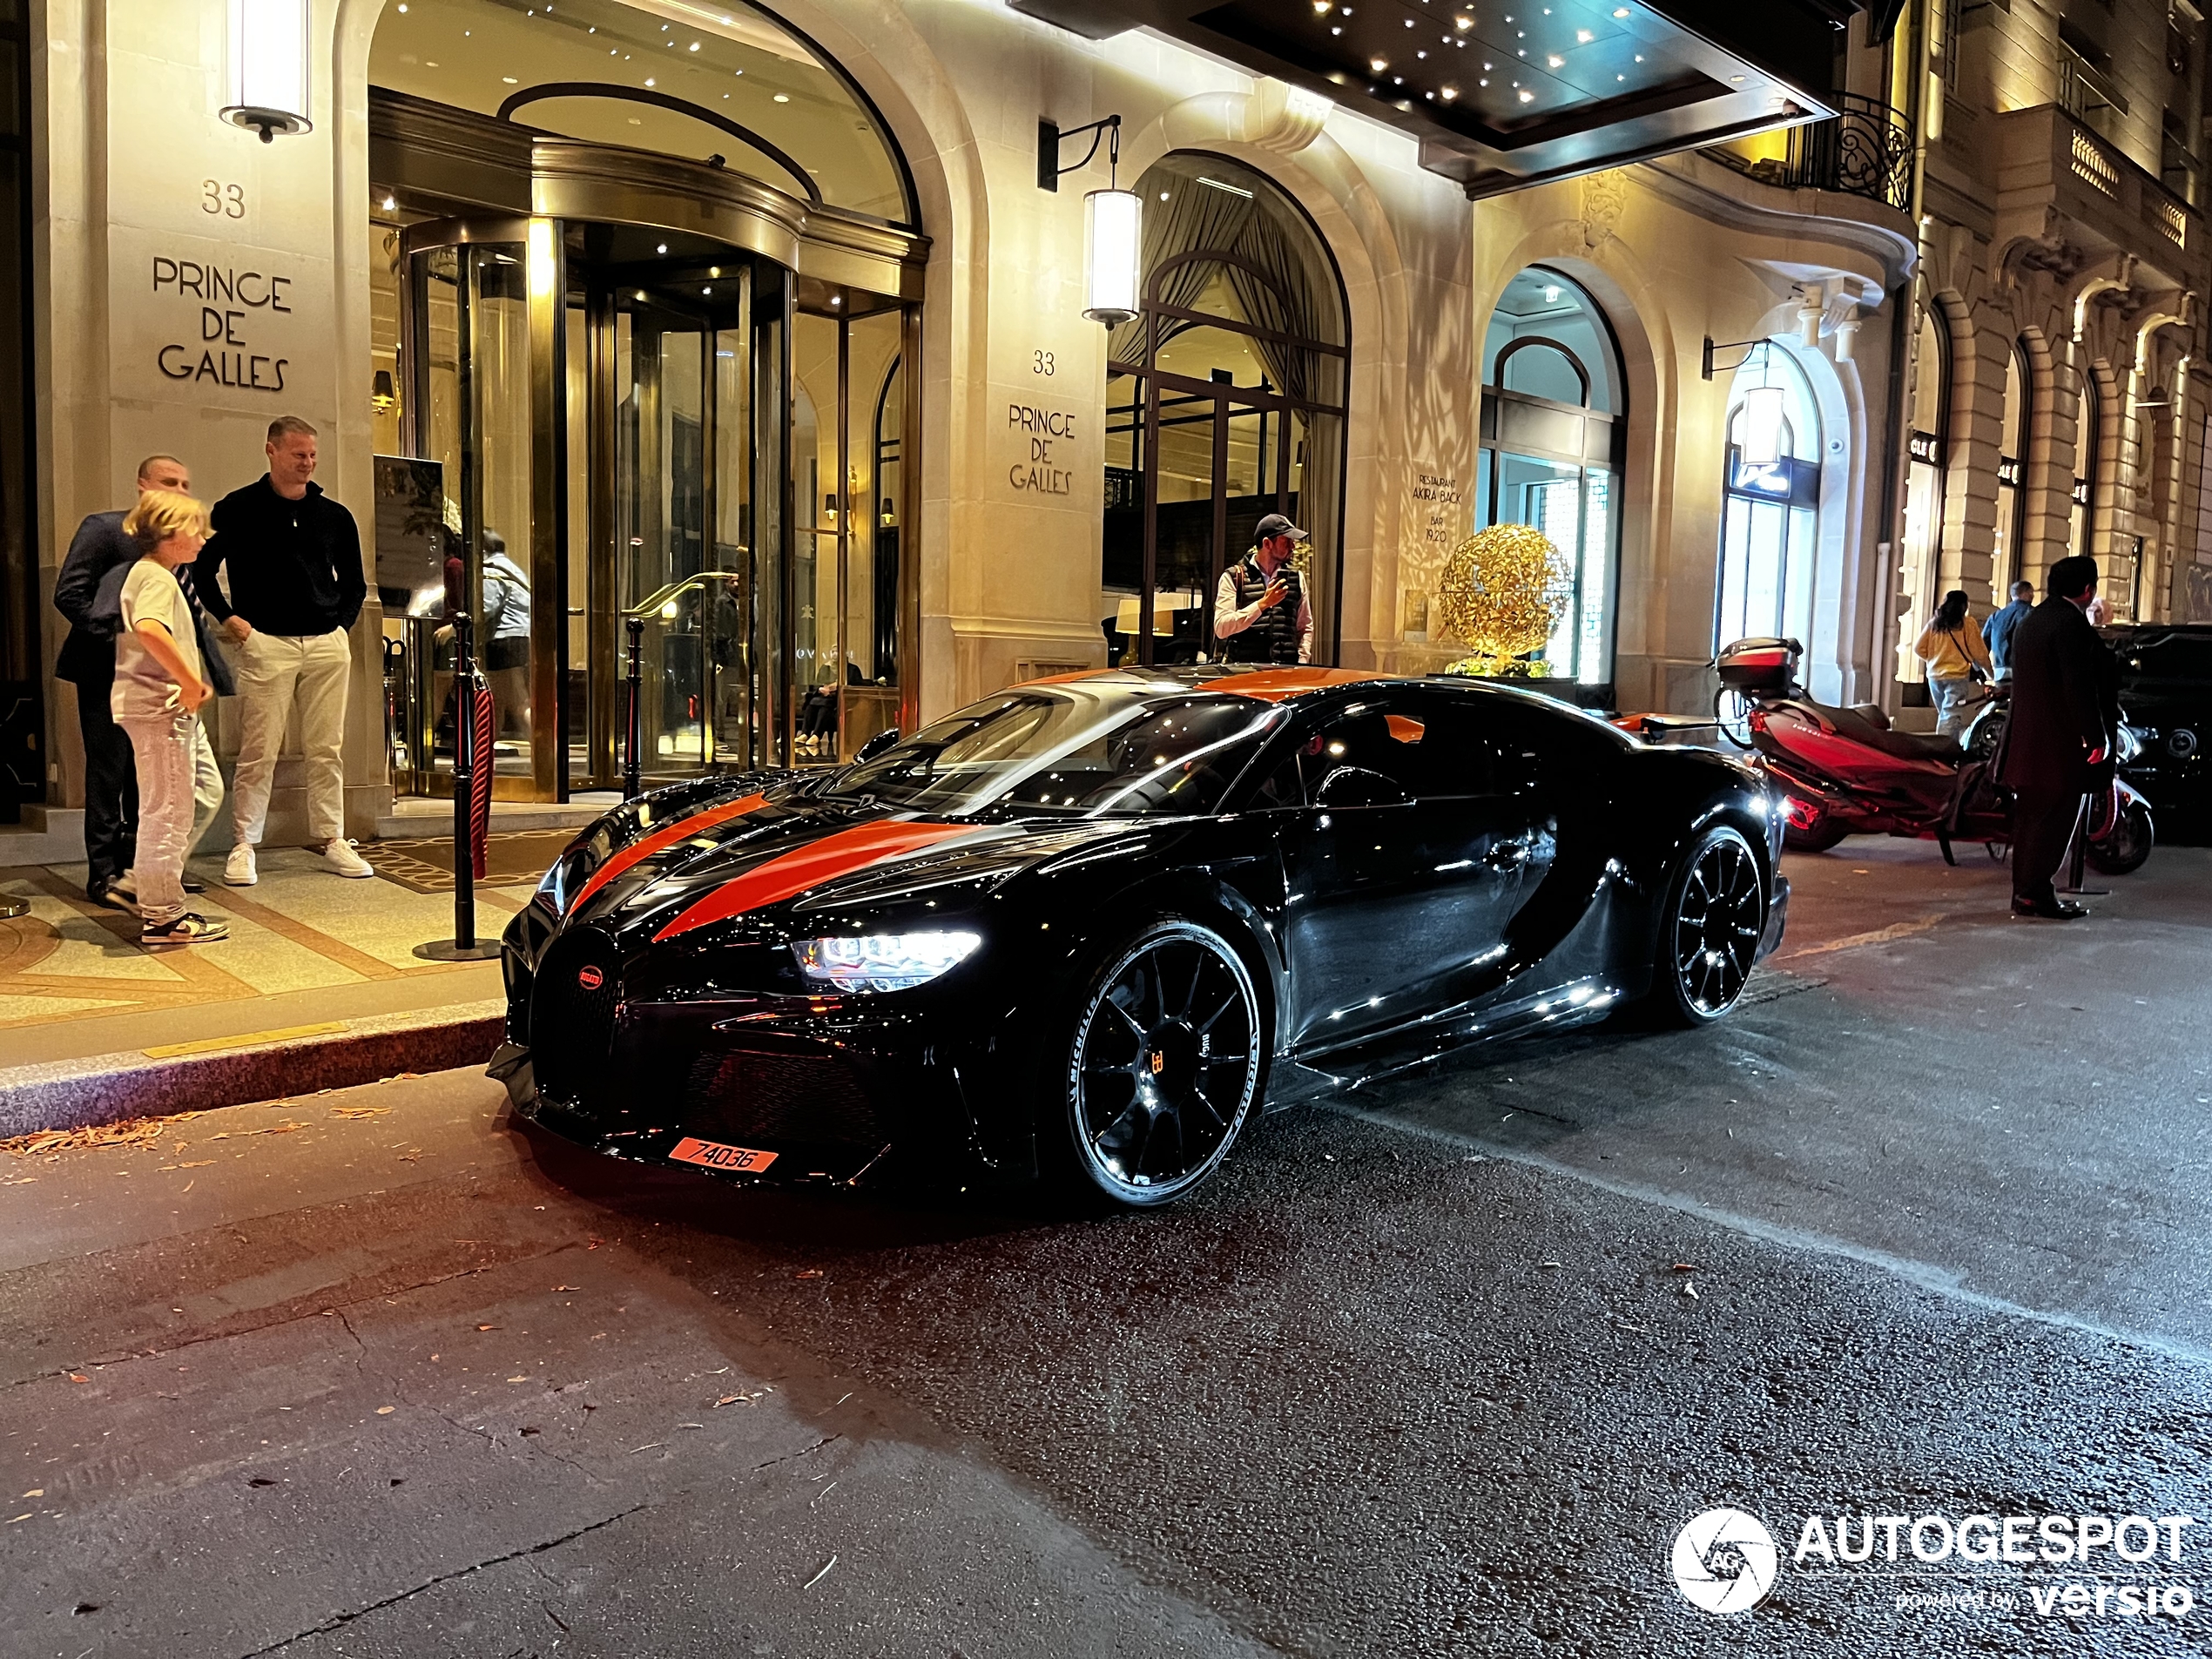 Another Bugatti shows up in Paris